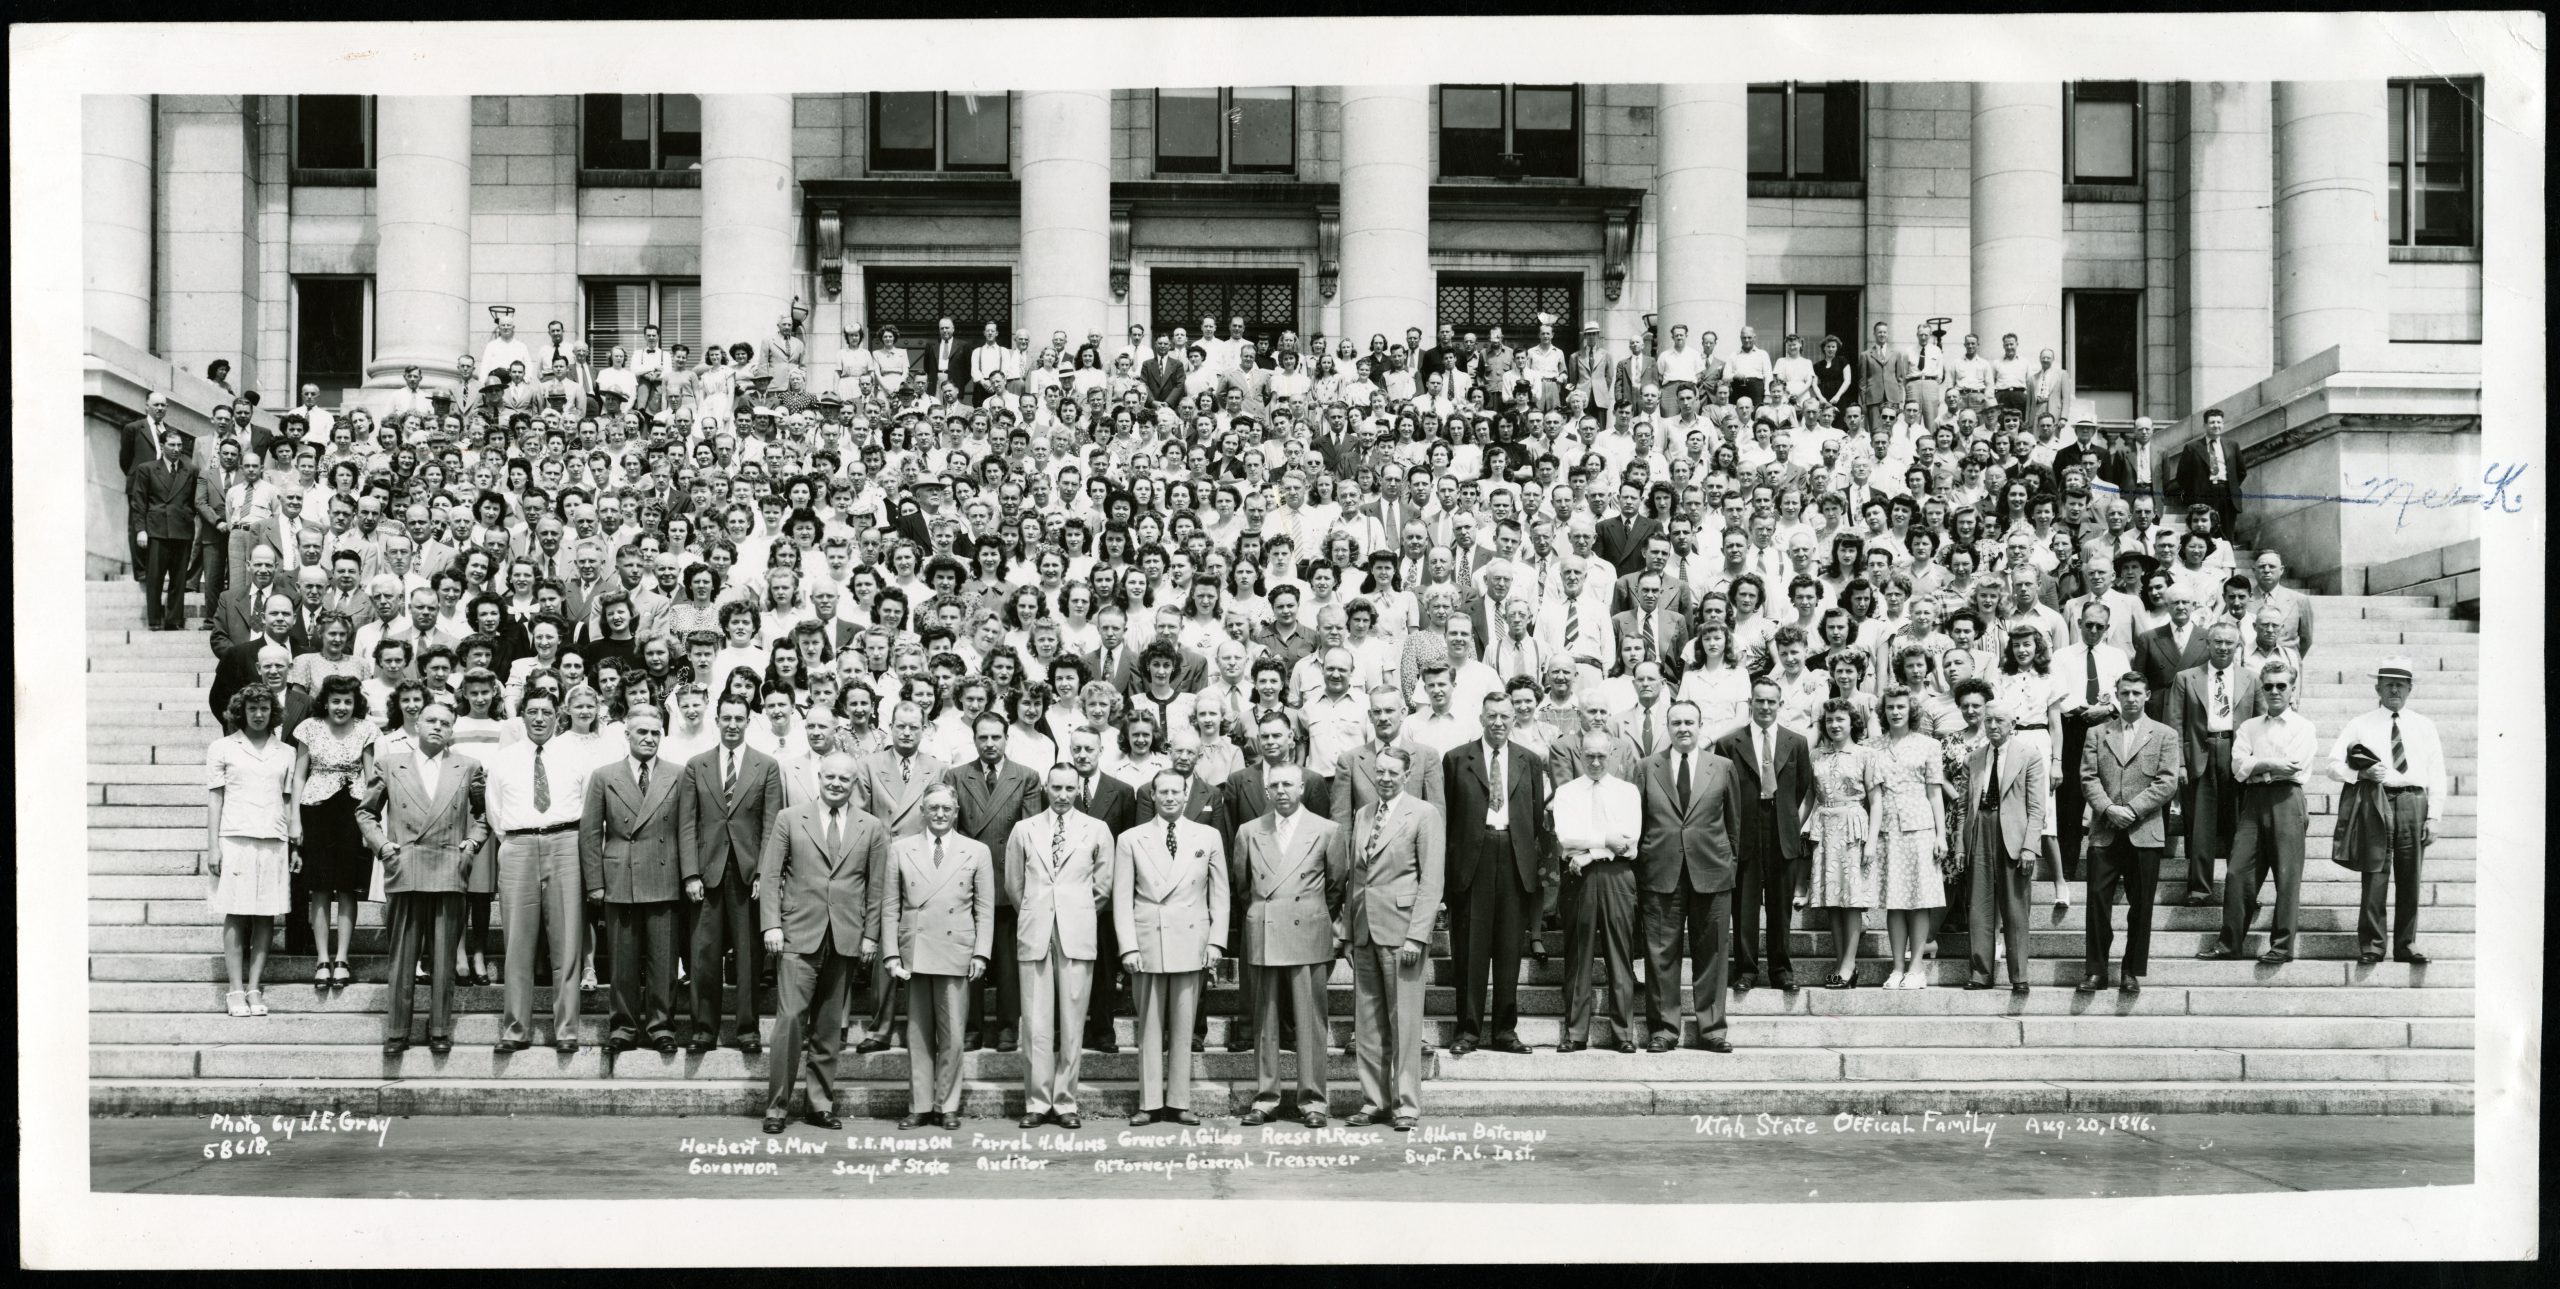 Photo of the Official State Family 1946 on the steps of the Utah State Capitol building